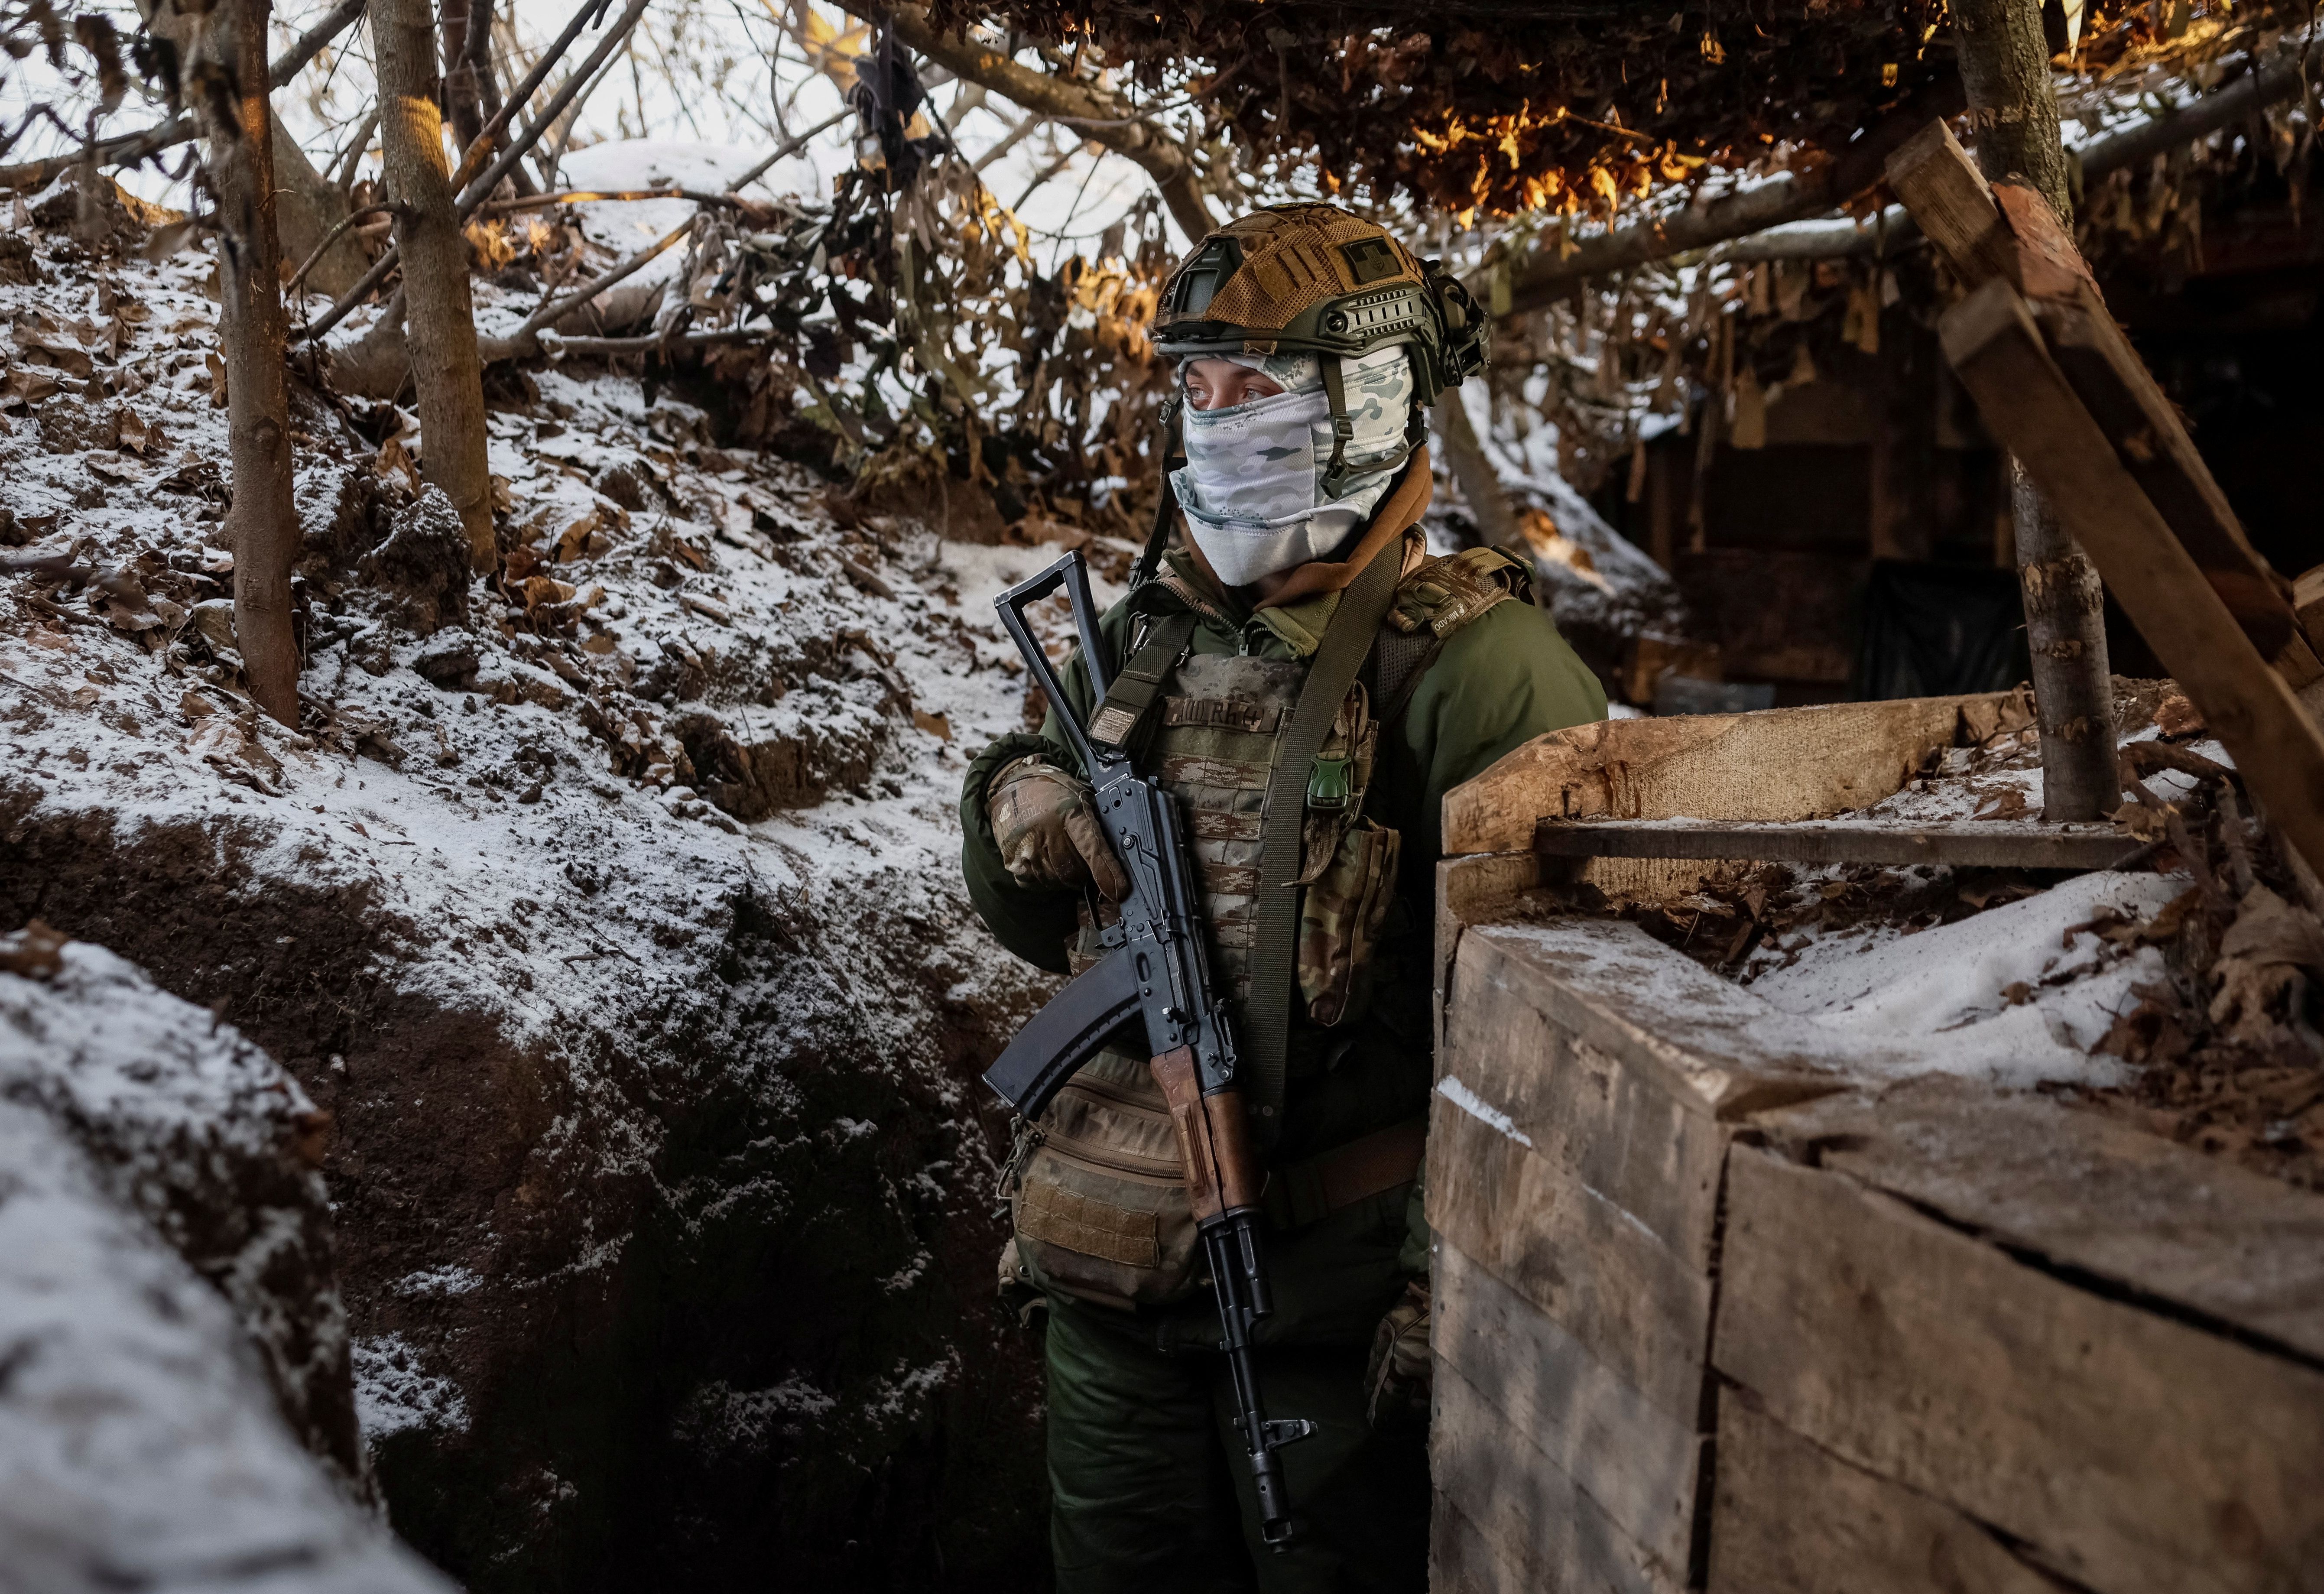 Ukraine's tragedies: A 'good deal' for some war supporters